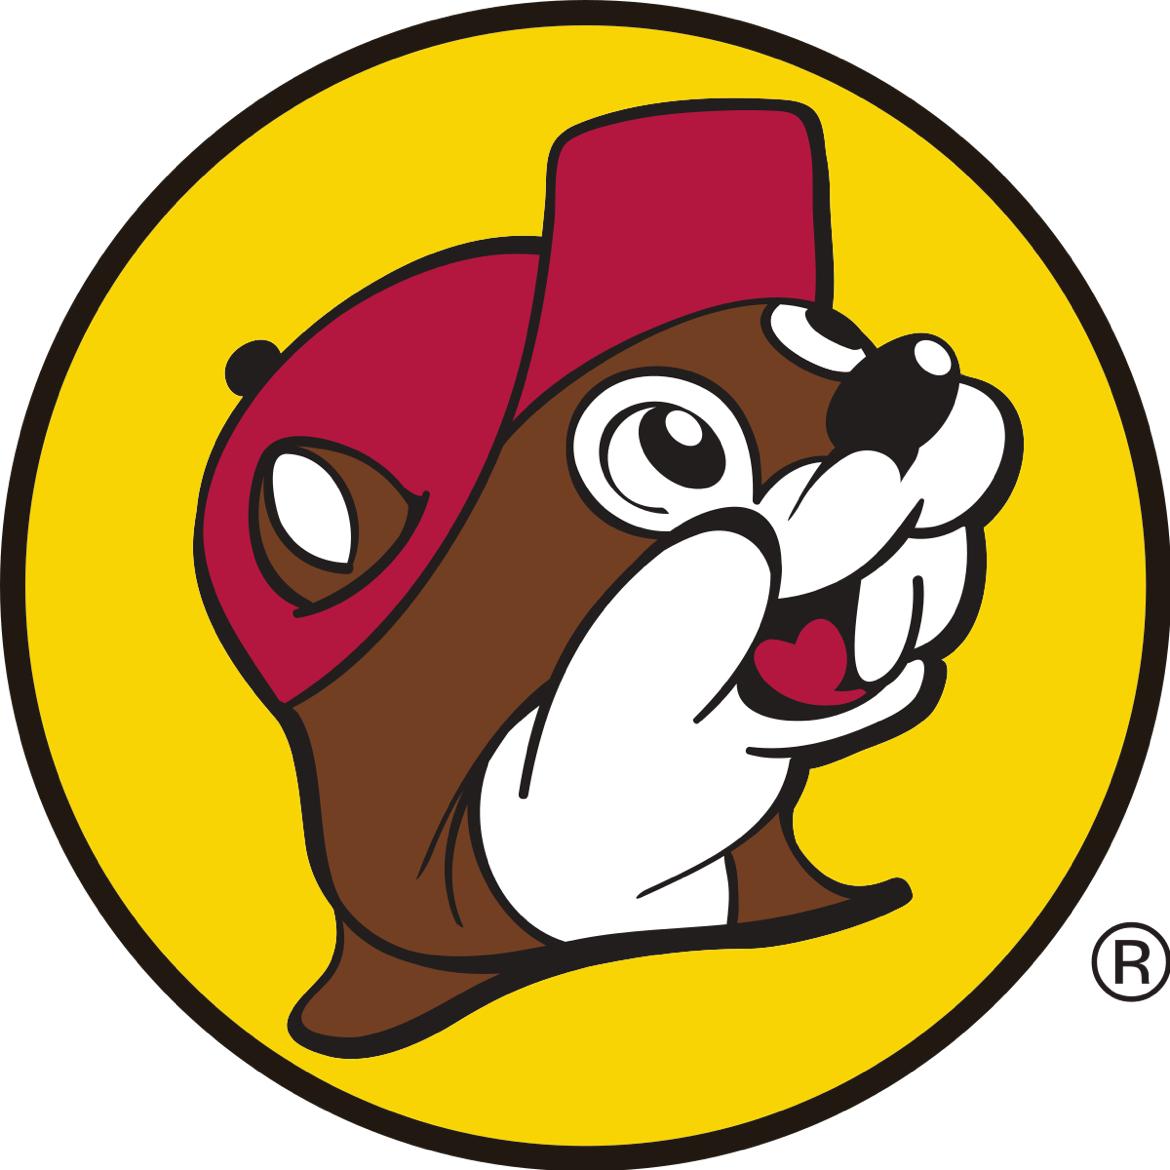 Buc-ees's images